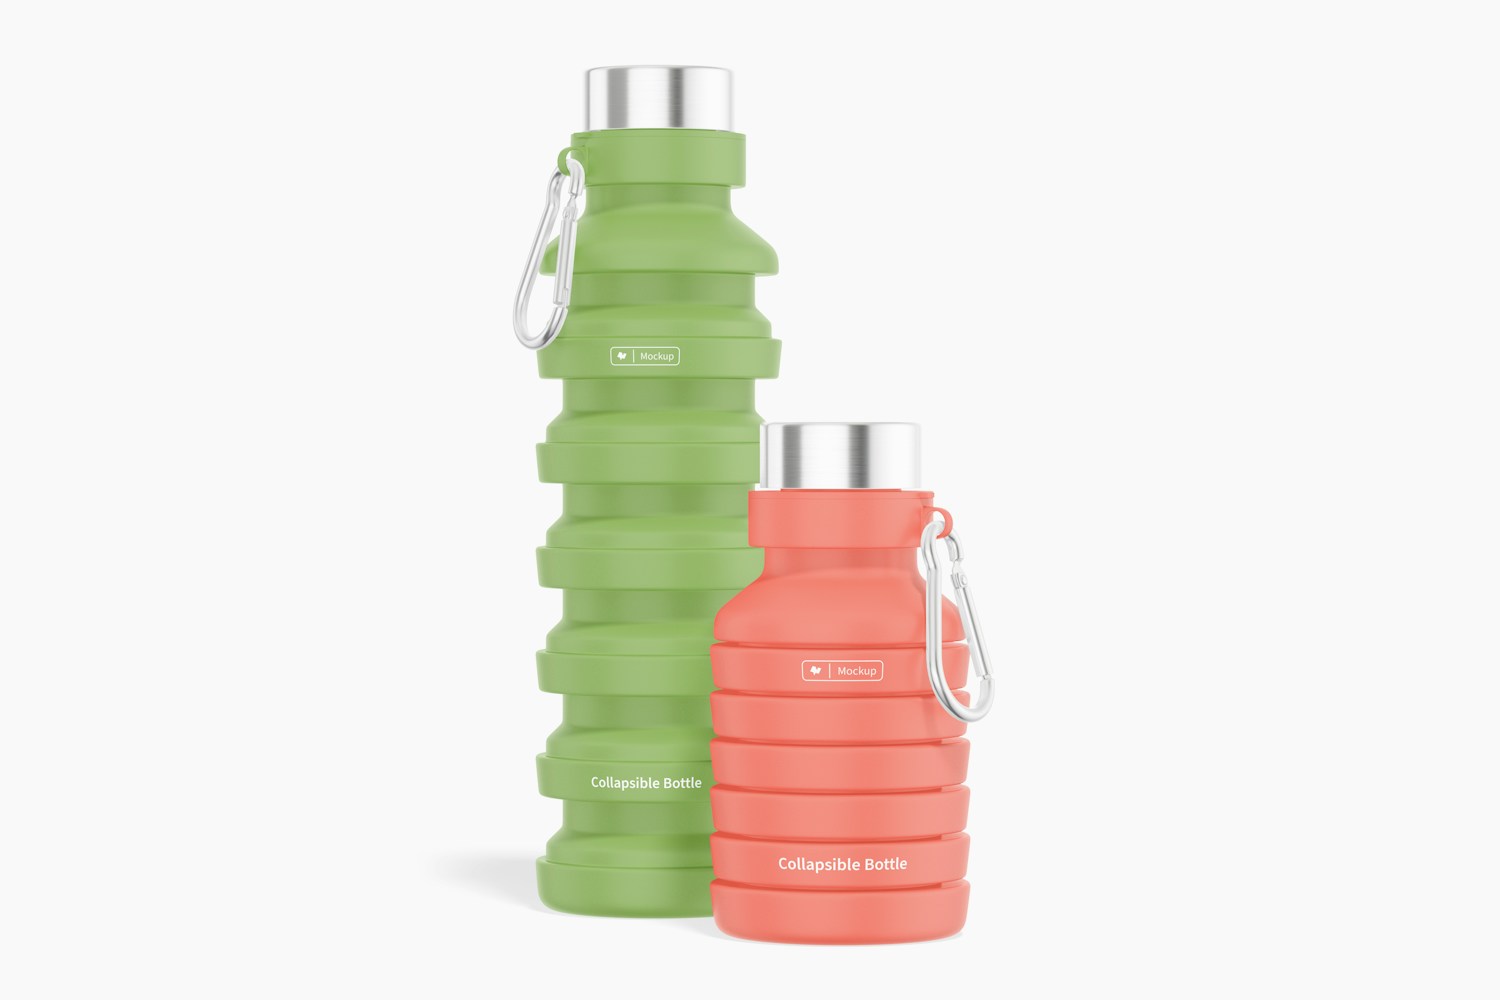 Collapsible Water Bottles Mockup